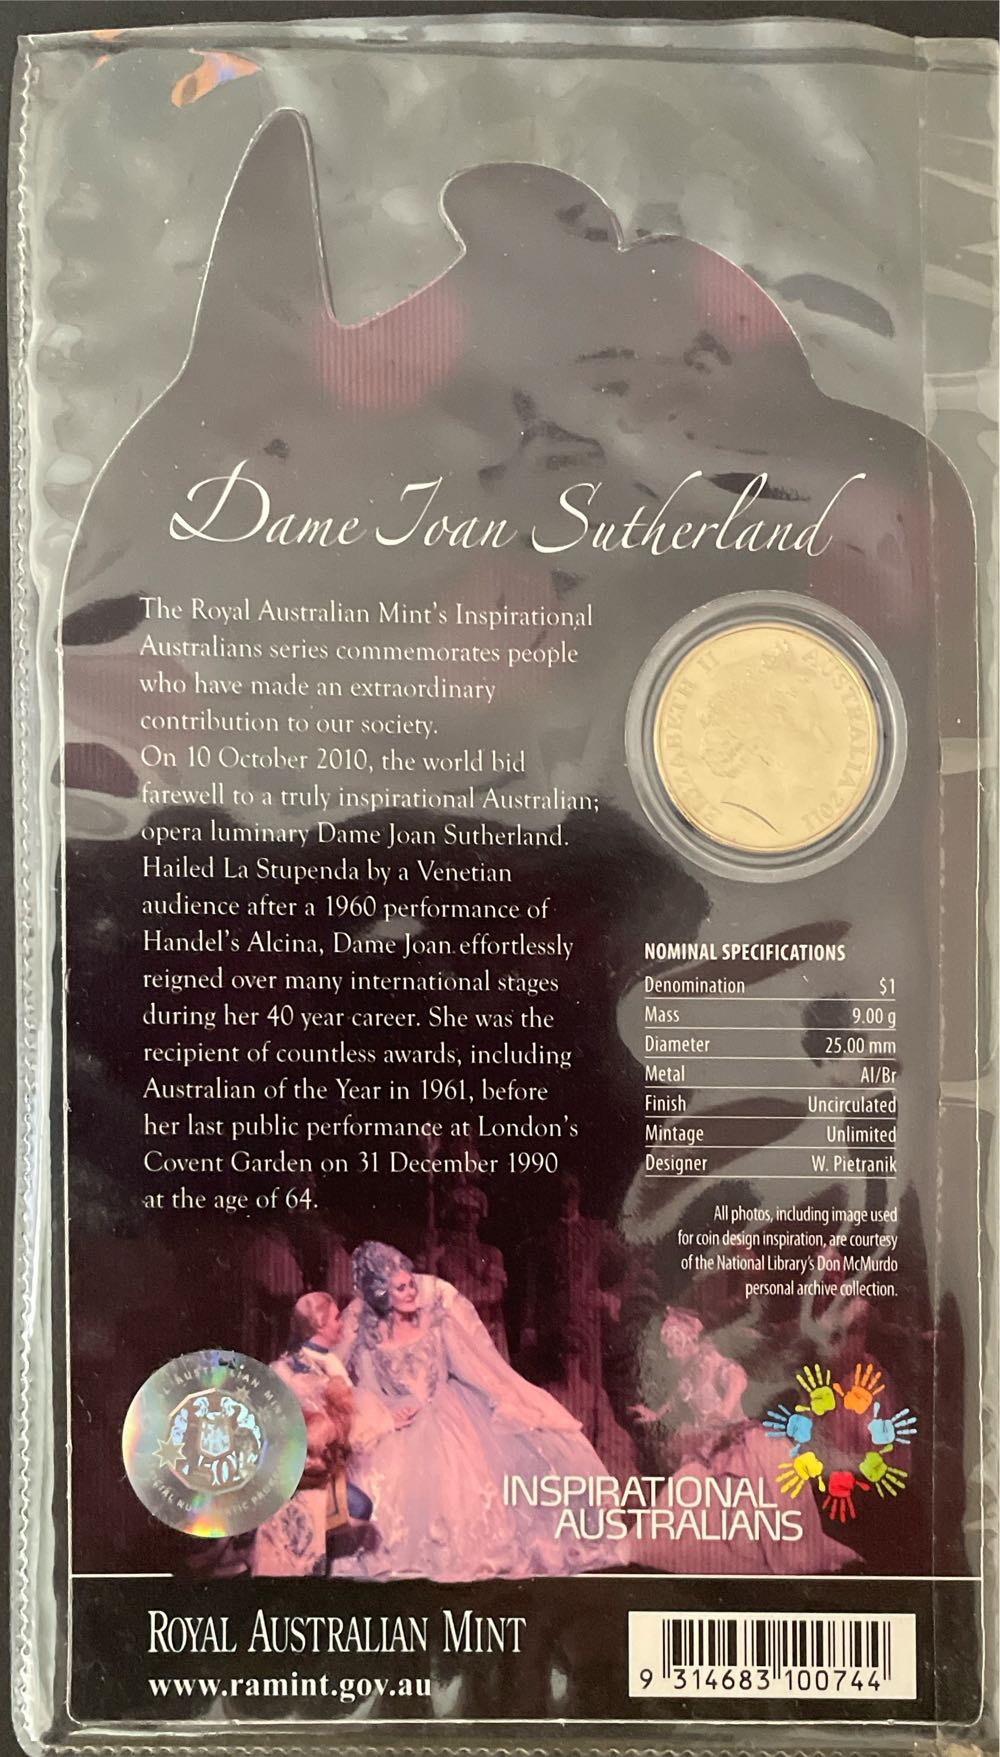 2011 $1 Uncirculated Inspirational Australians - Dame Joan Sutherland  coin collectible [Barcode 9314683100744] - Main Image 2